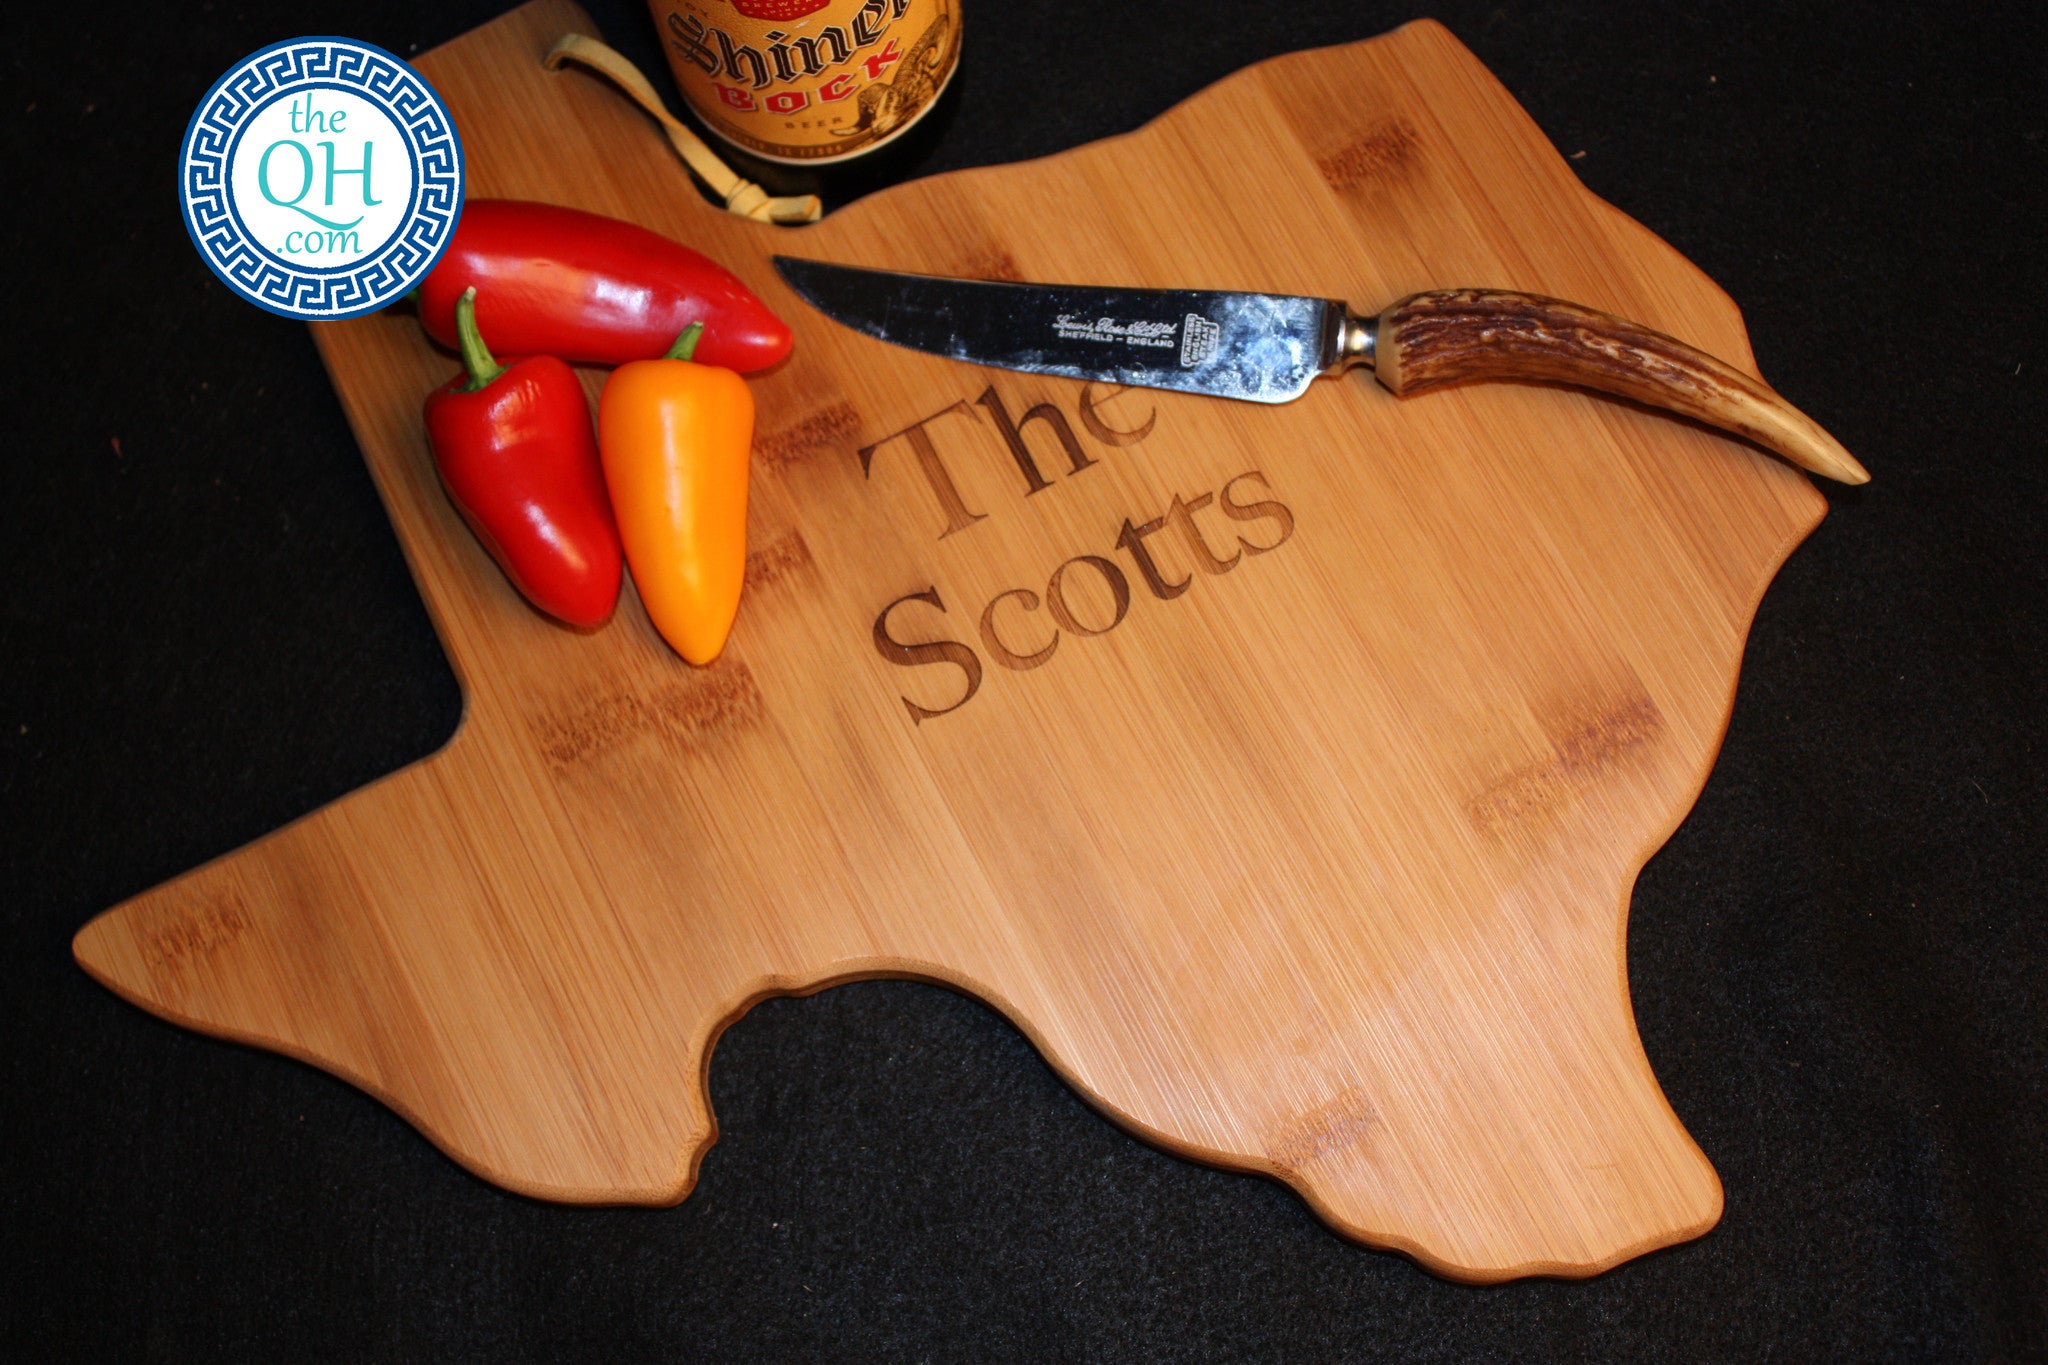 A Love As Big As Texas Chopping Board - Personalized Gallery